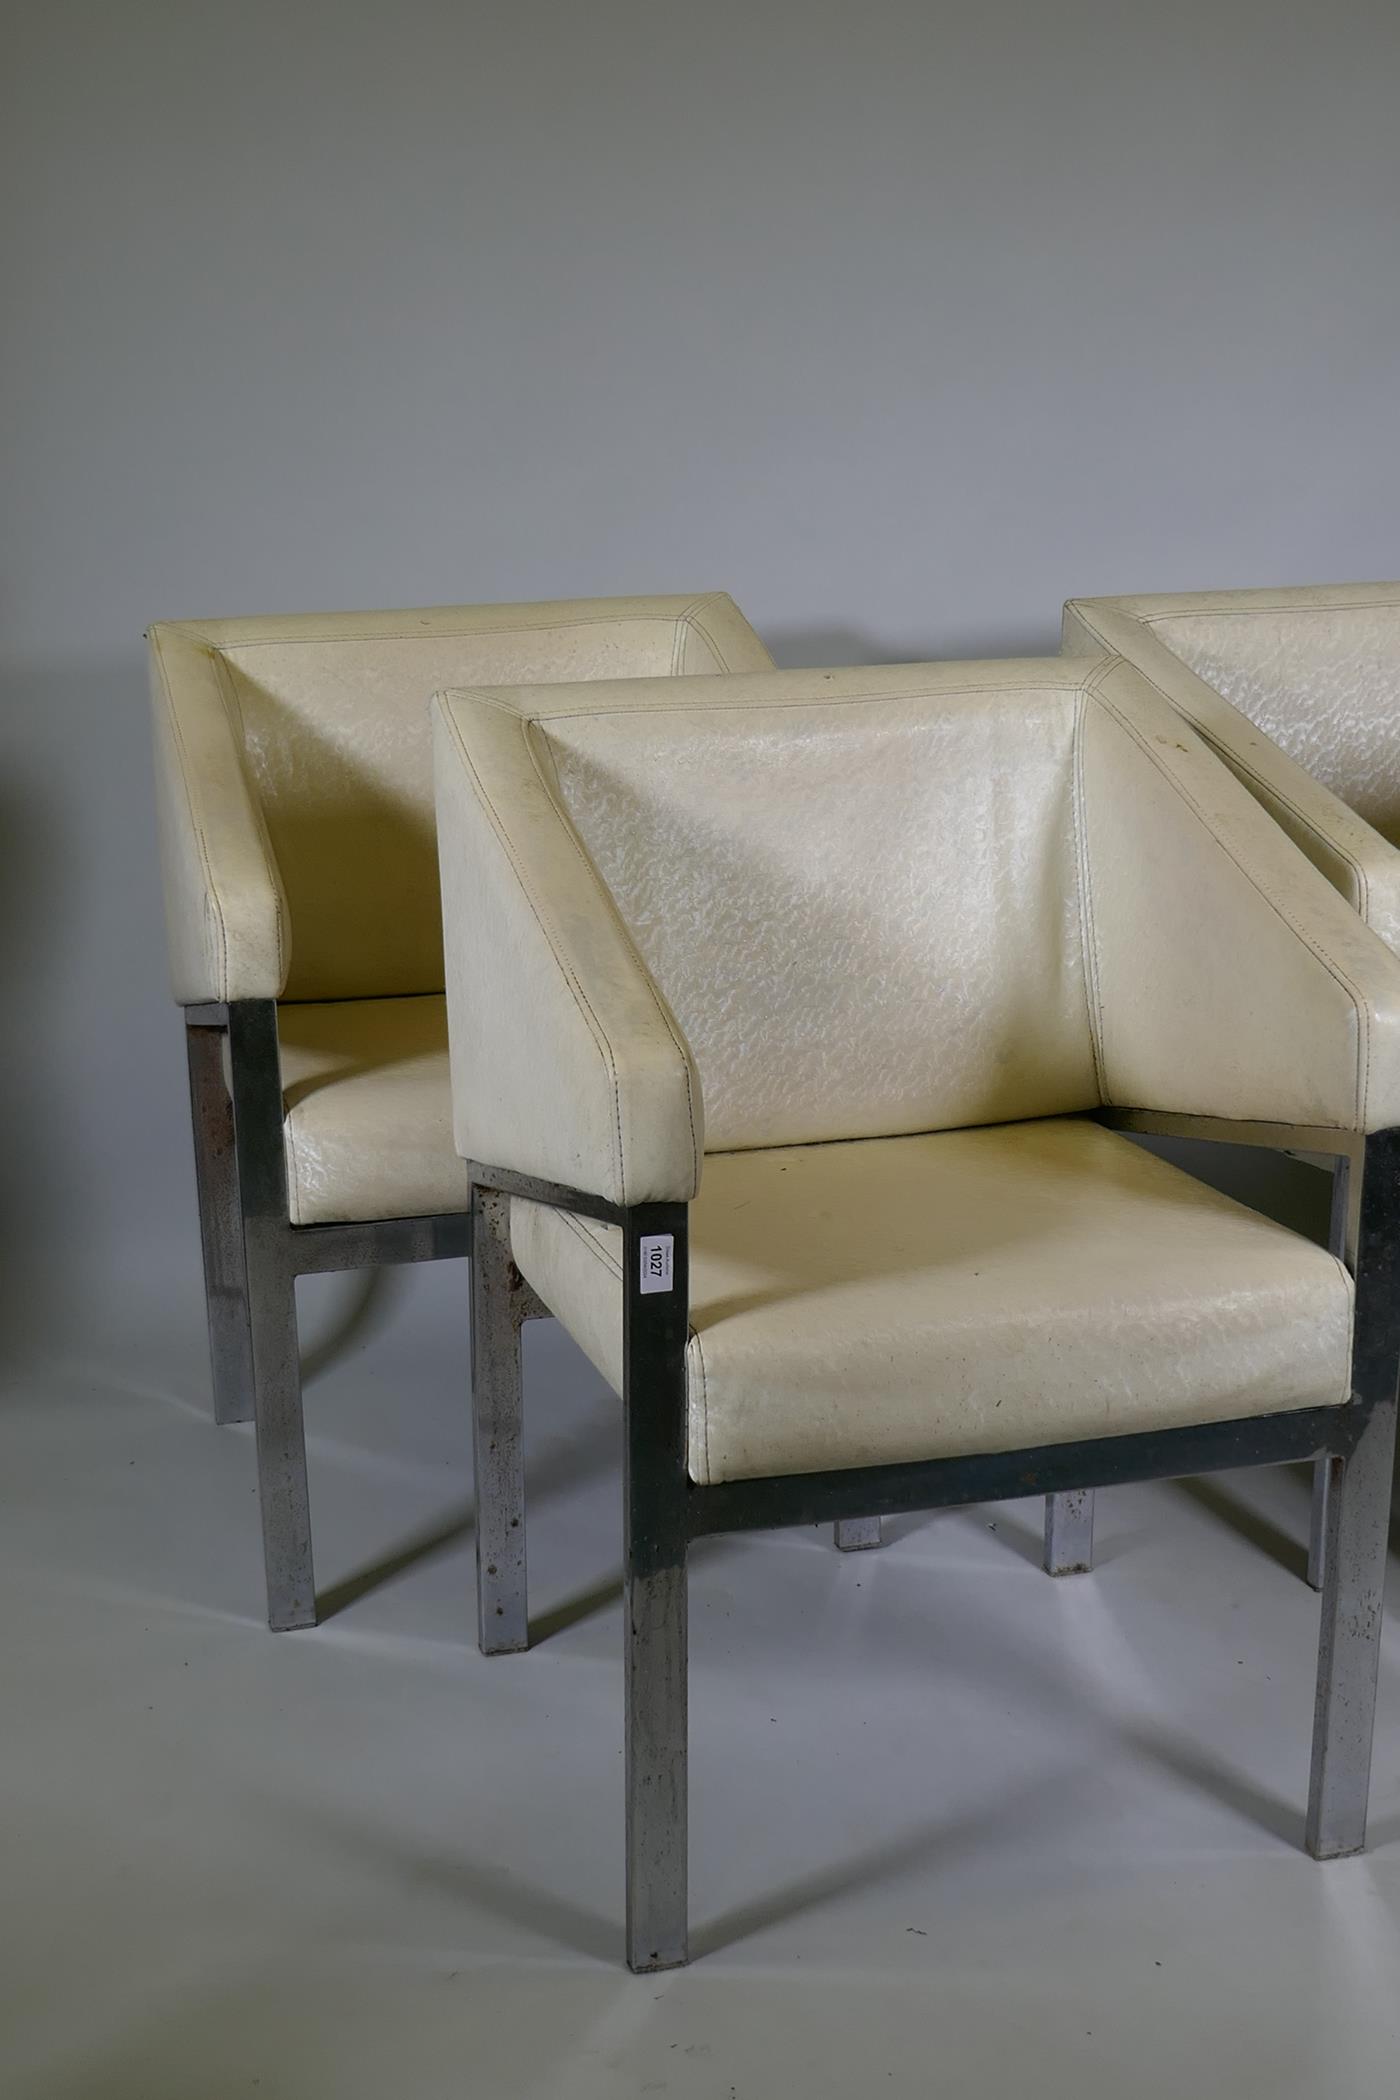 Four mid-century chromed metal framed arm chairs with vinyl covers - Image 2 of 2